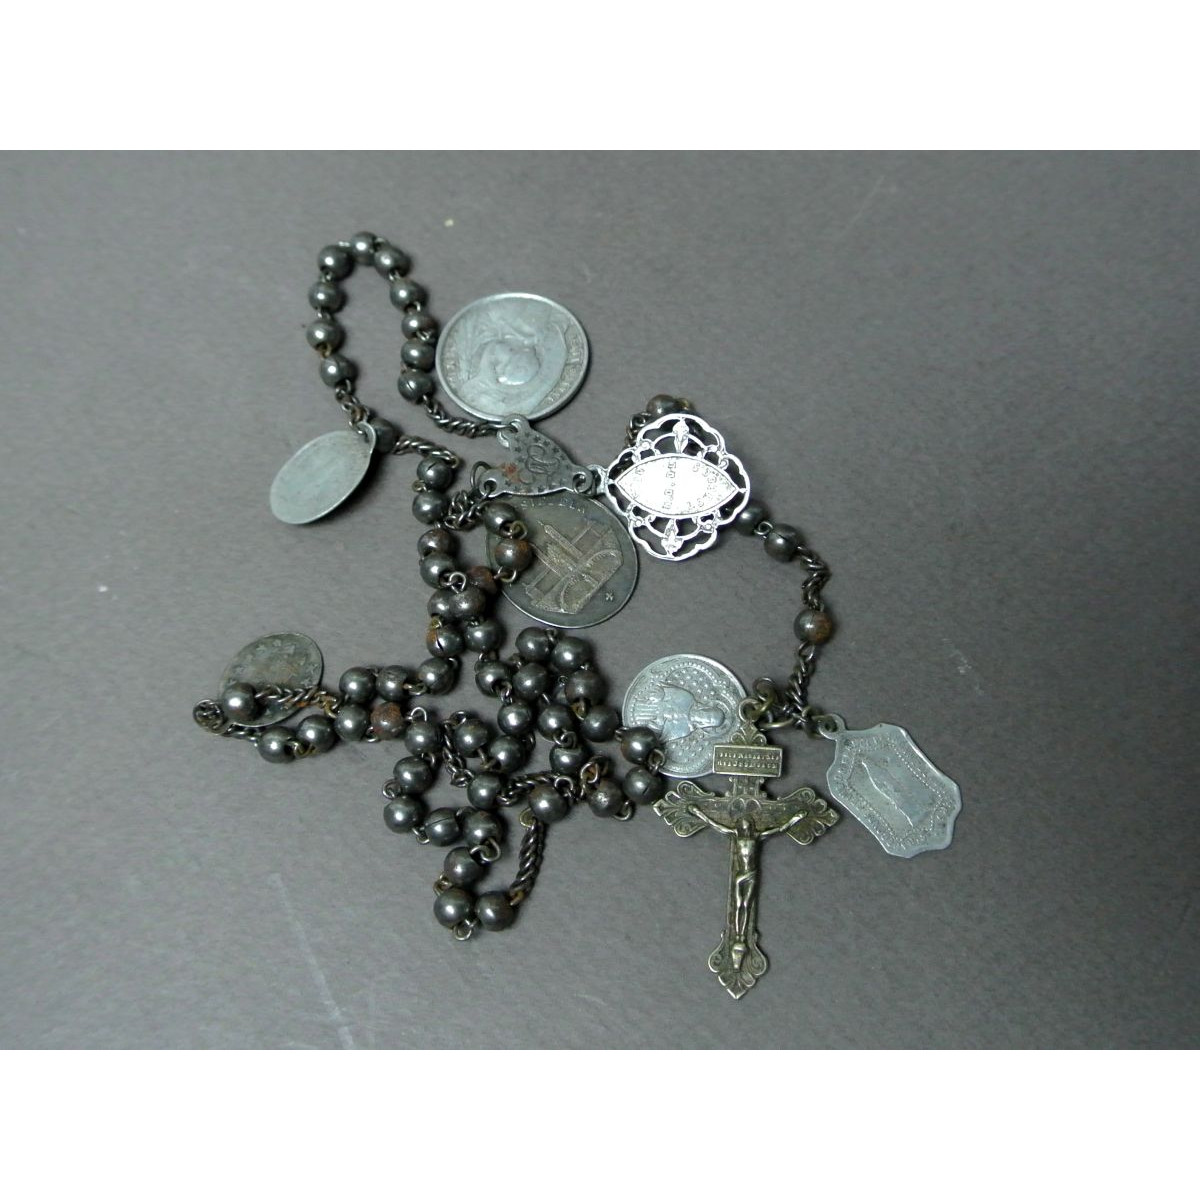 Old metal rosary with 8 medals - Le palais des bricoles